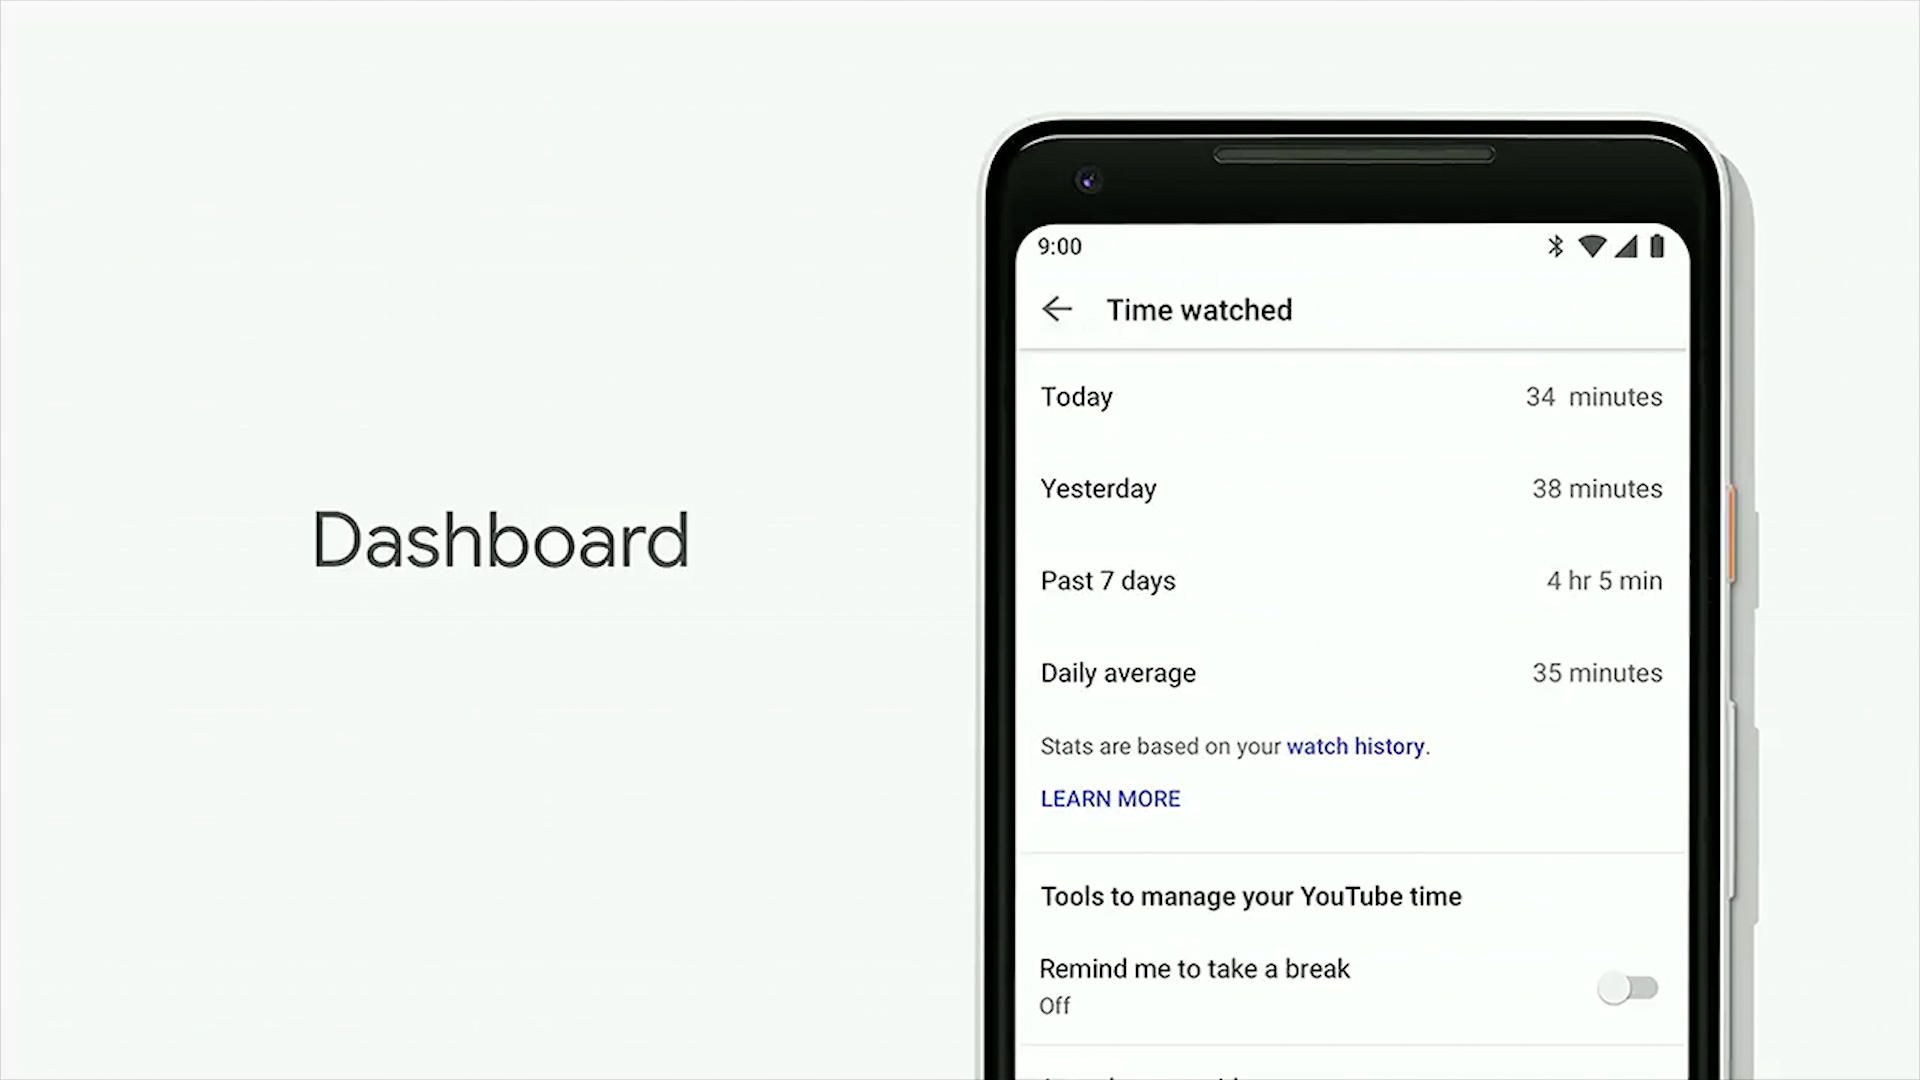 Android P has features to curb smartphone addiction - Video - CNET